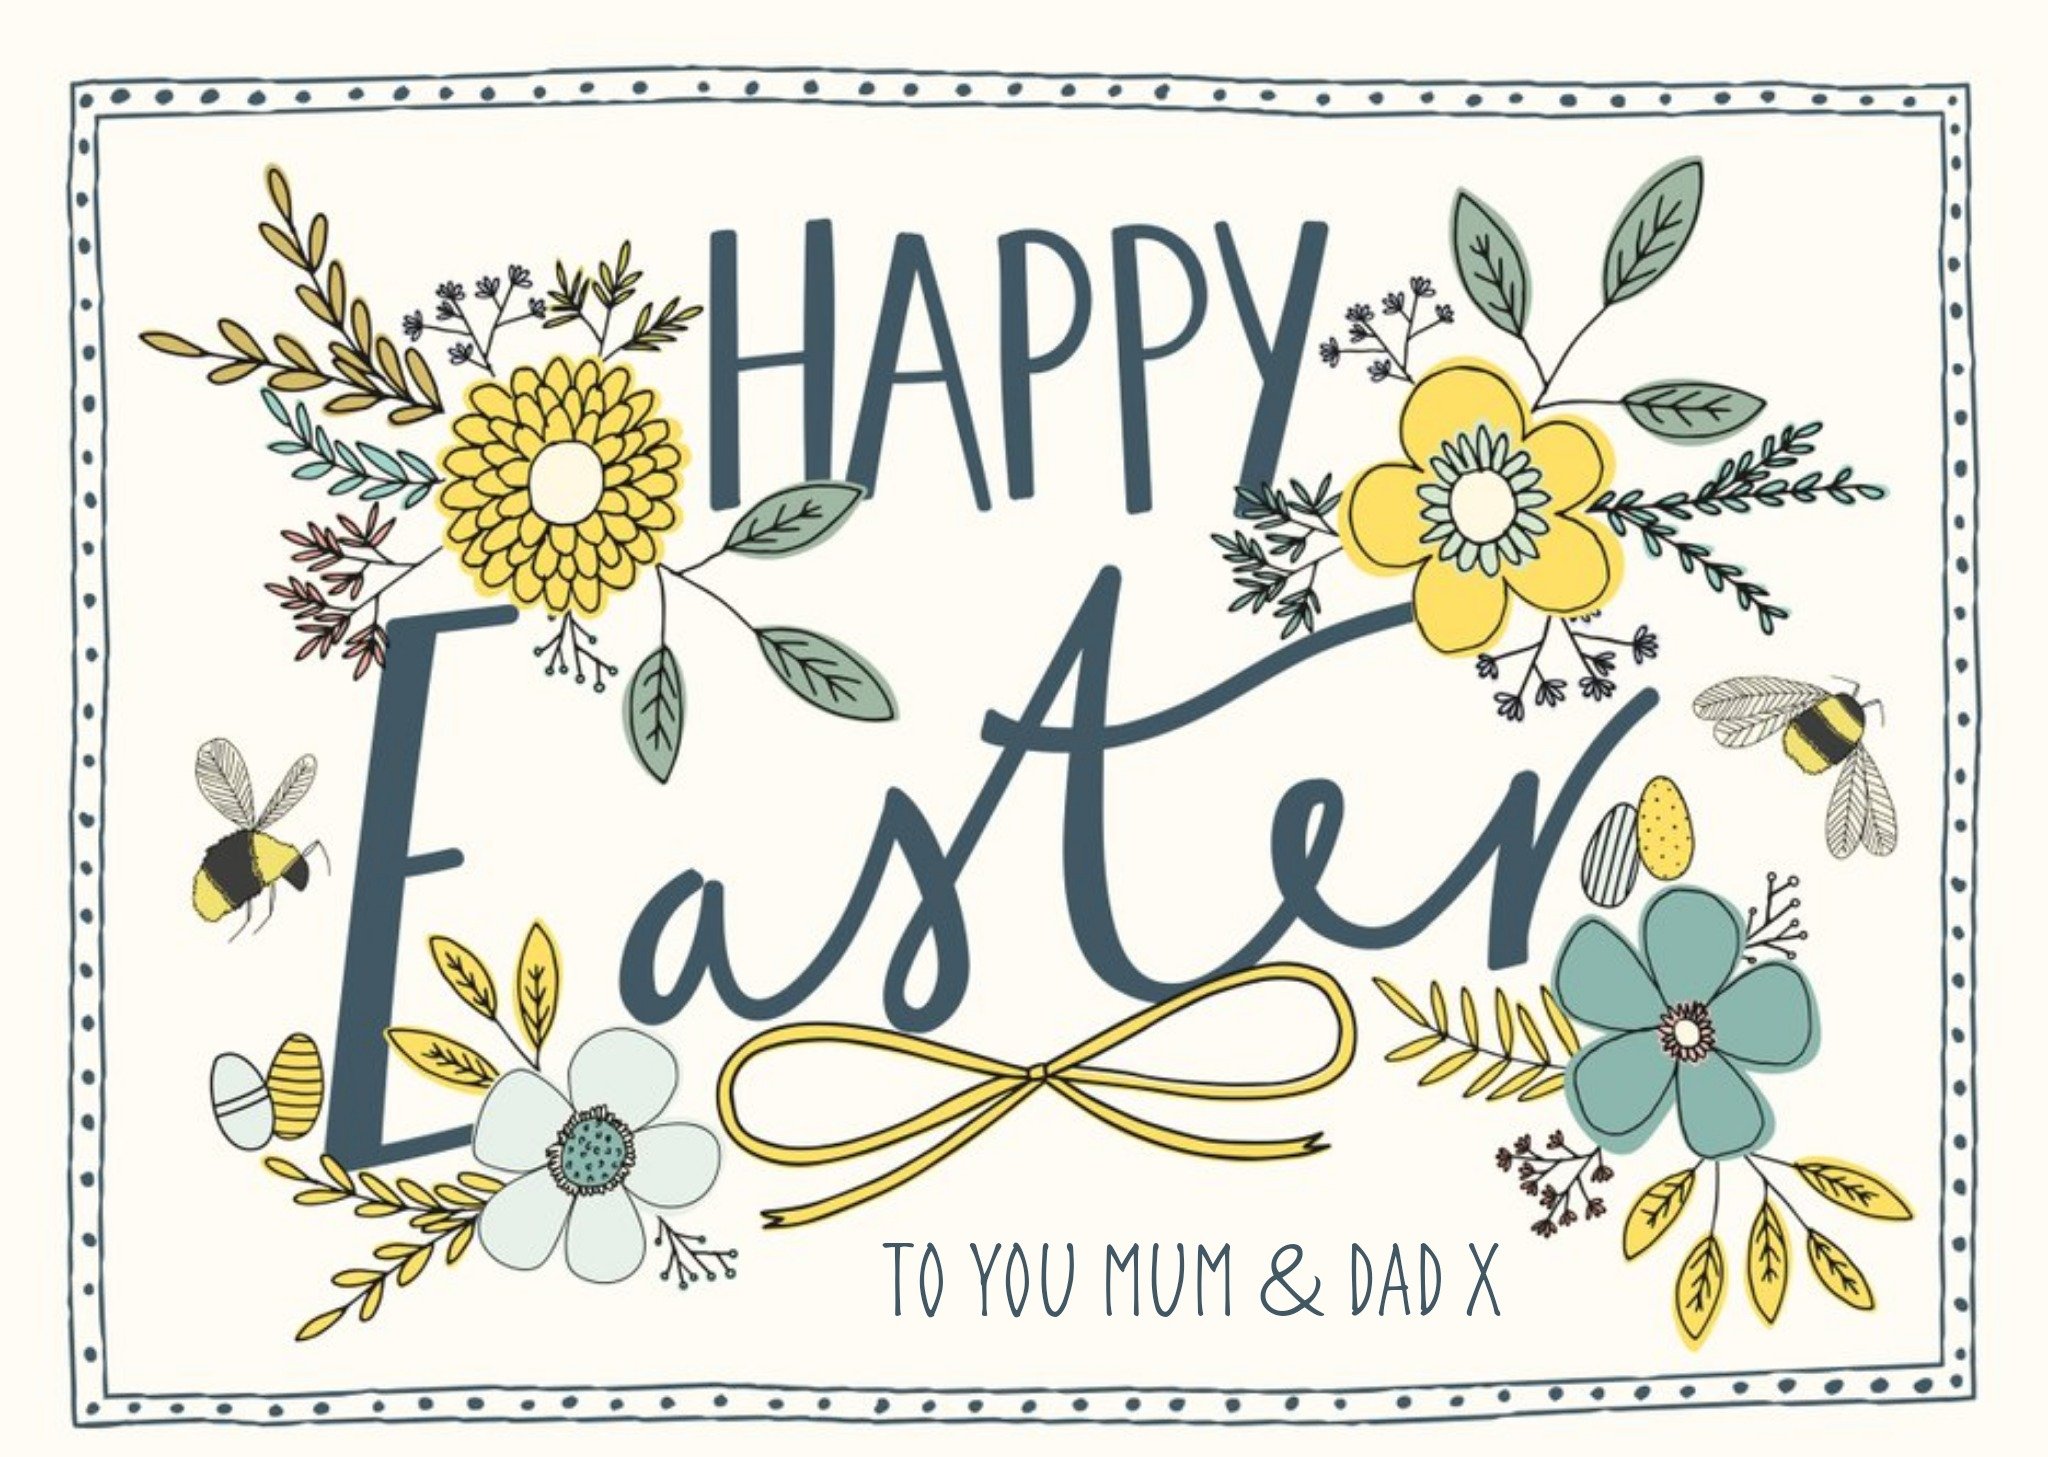 Moonpig Floral Happy Easter Mum & Dad Card, Large